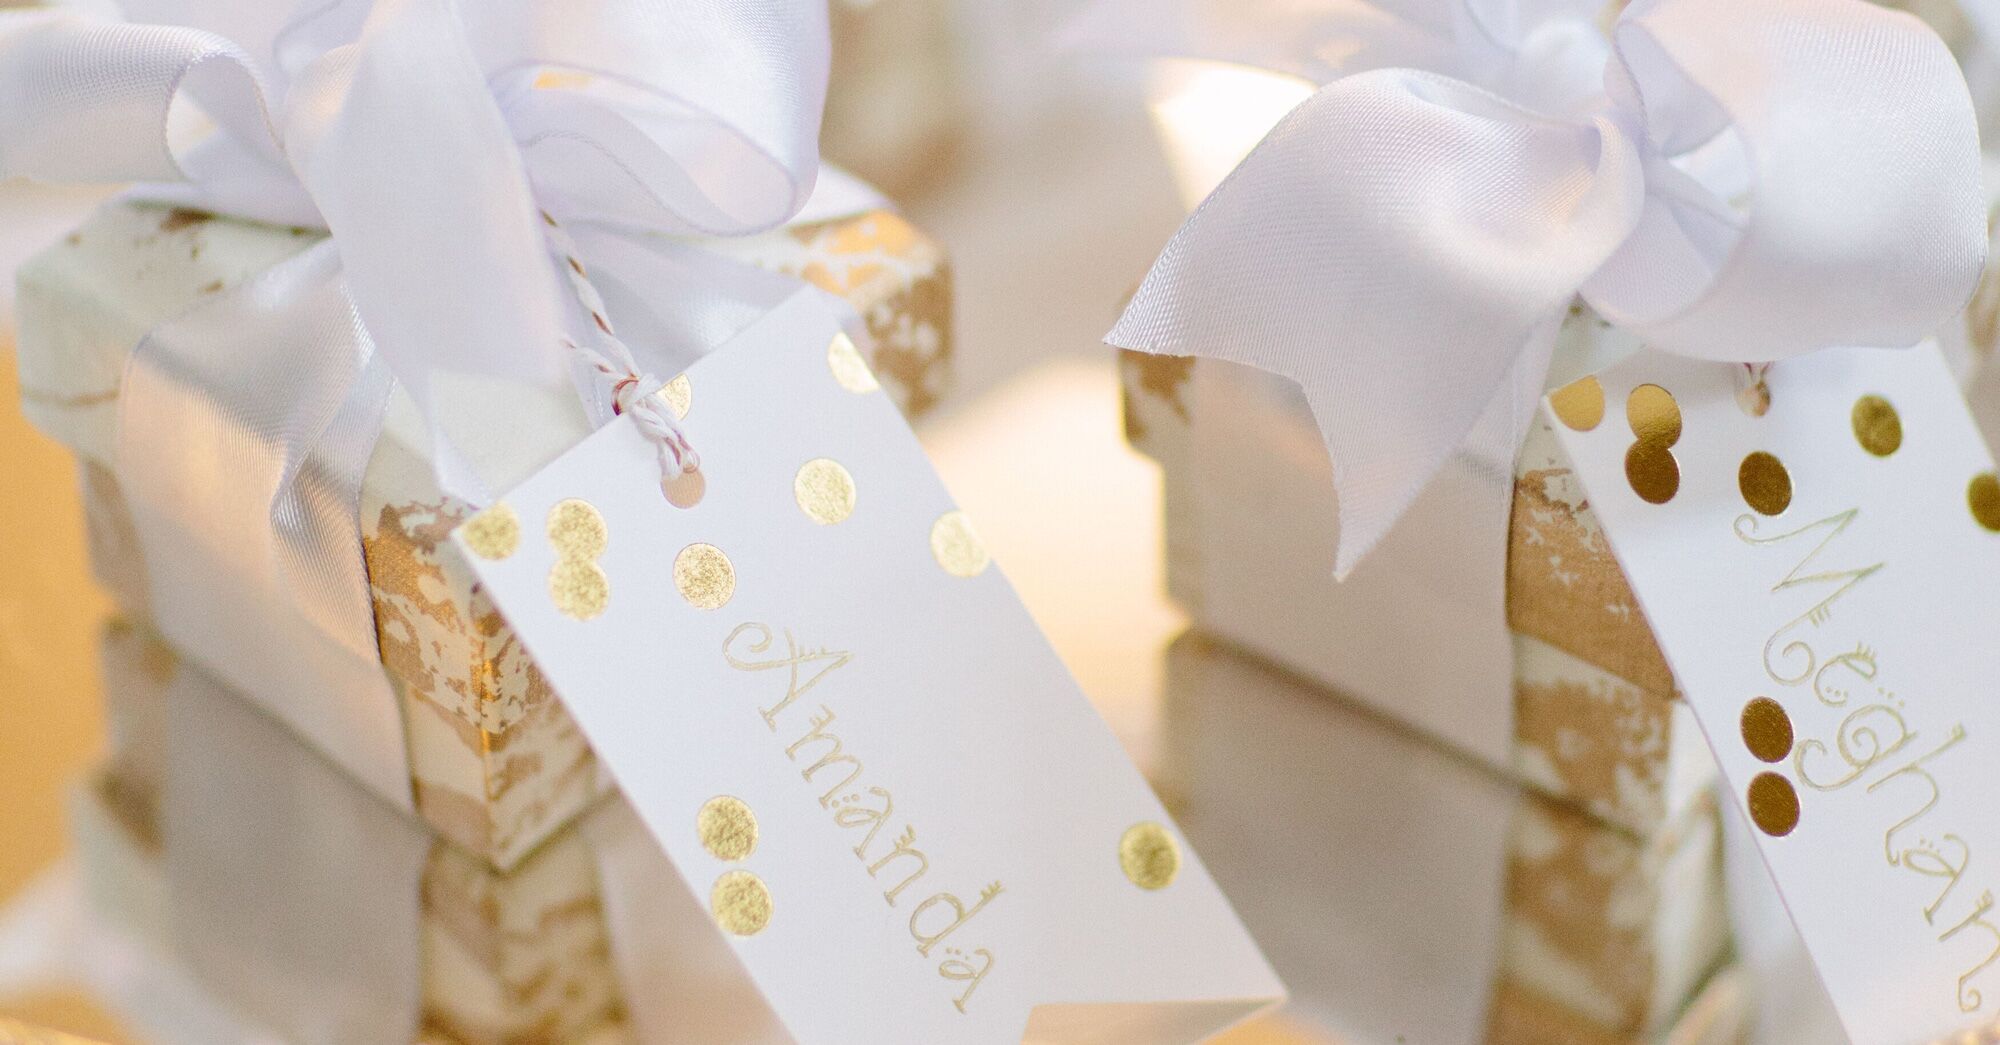 60 Bridesmaid Gift Ideas For Any Bridal Party